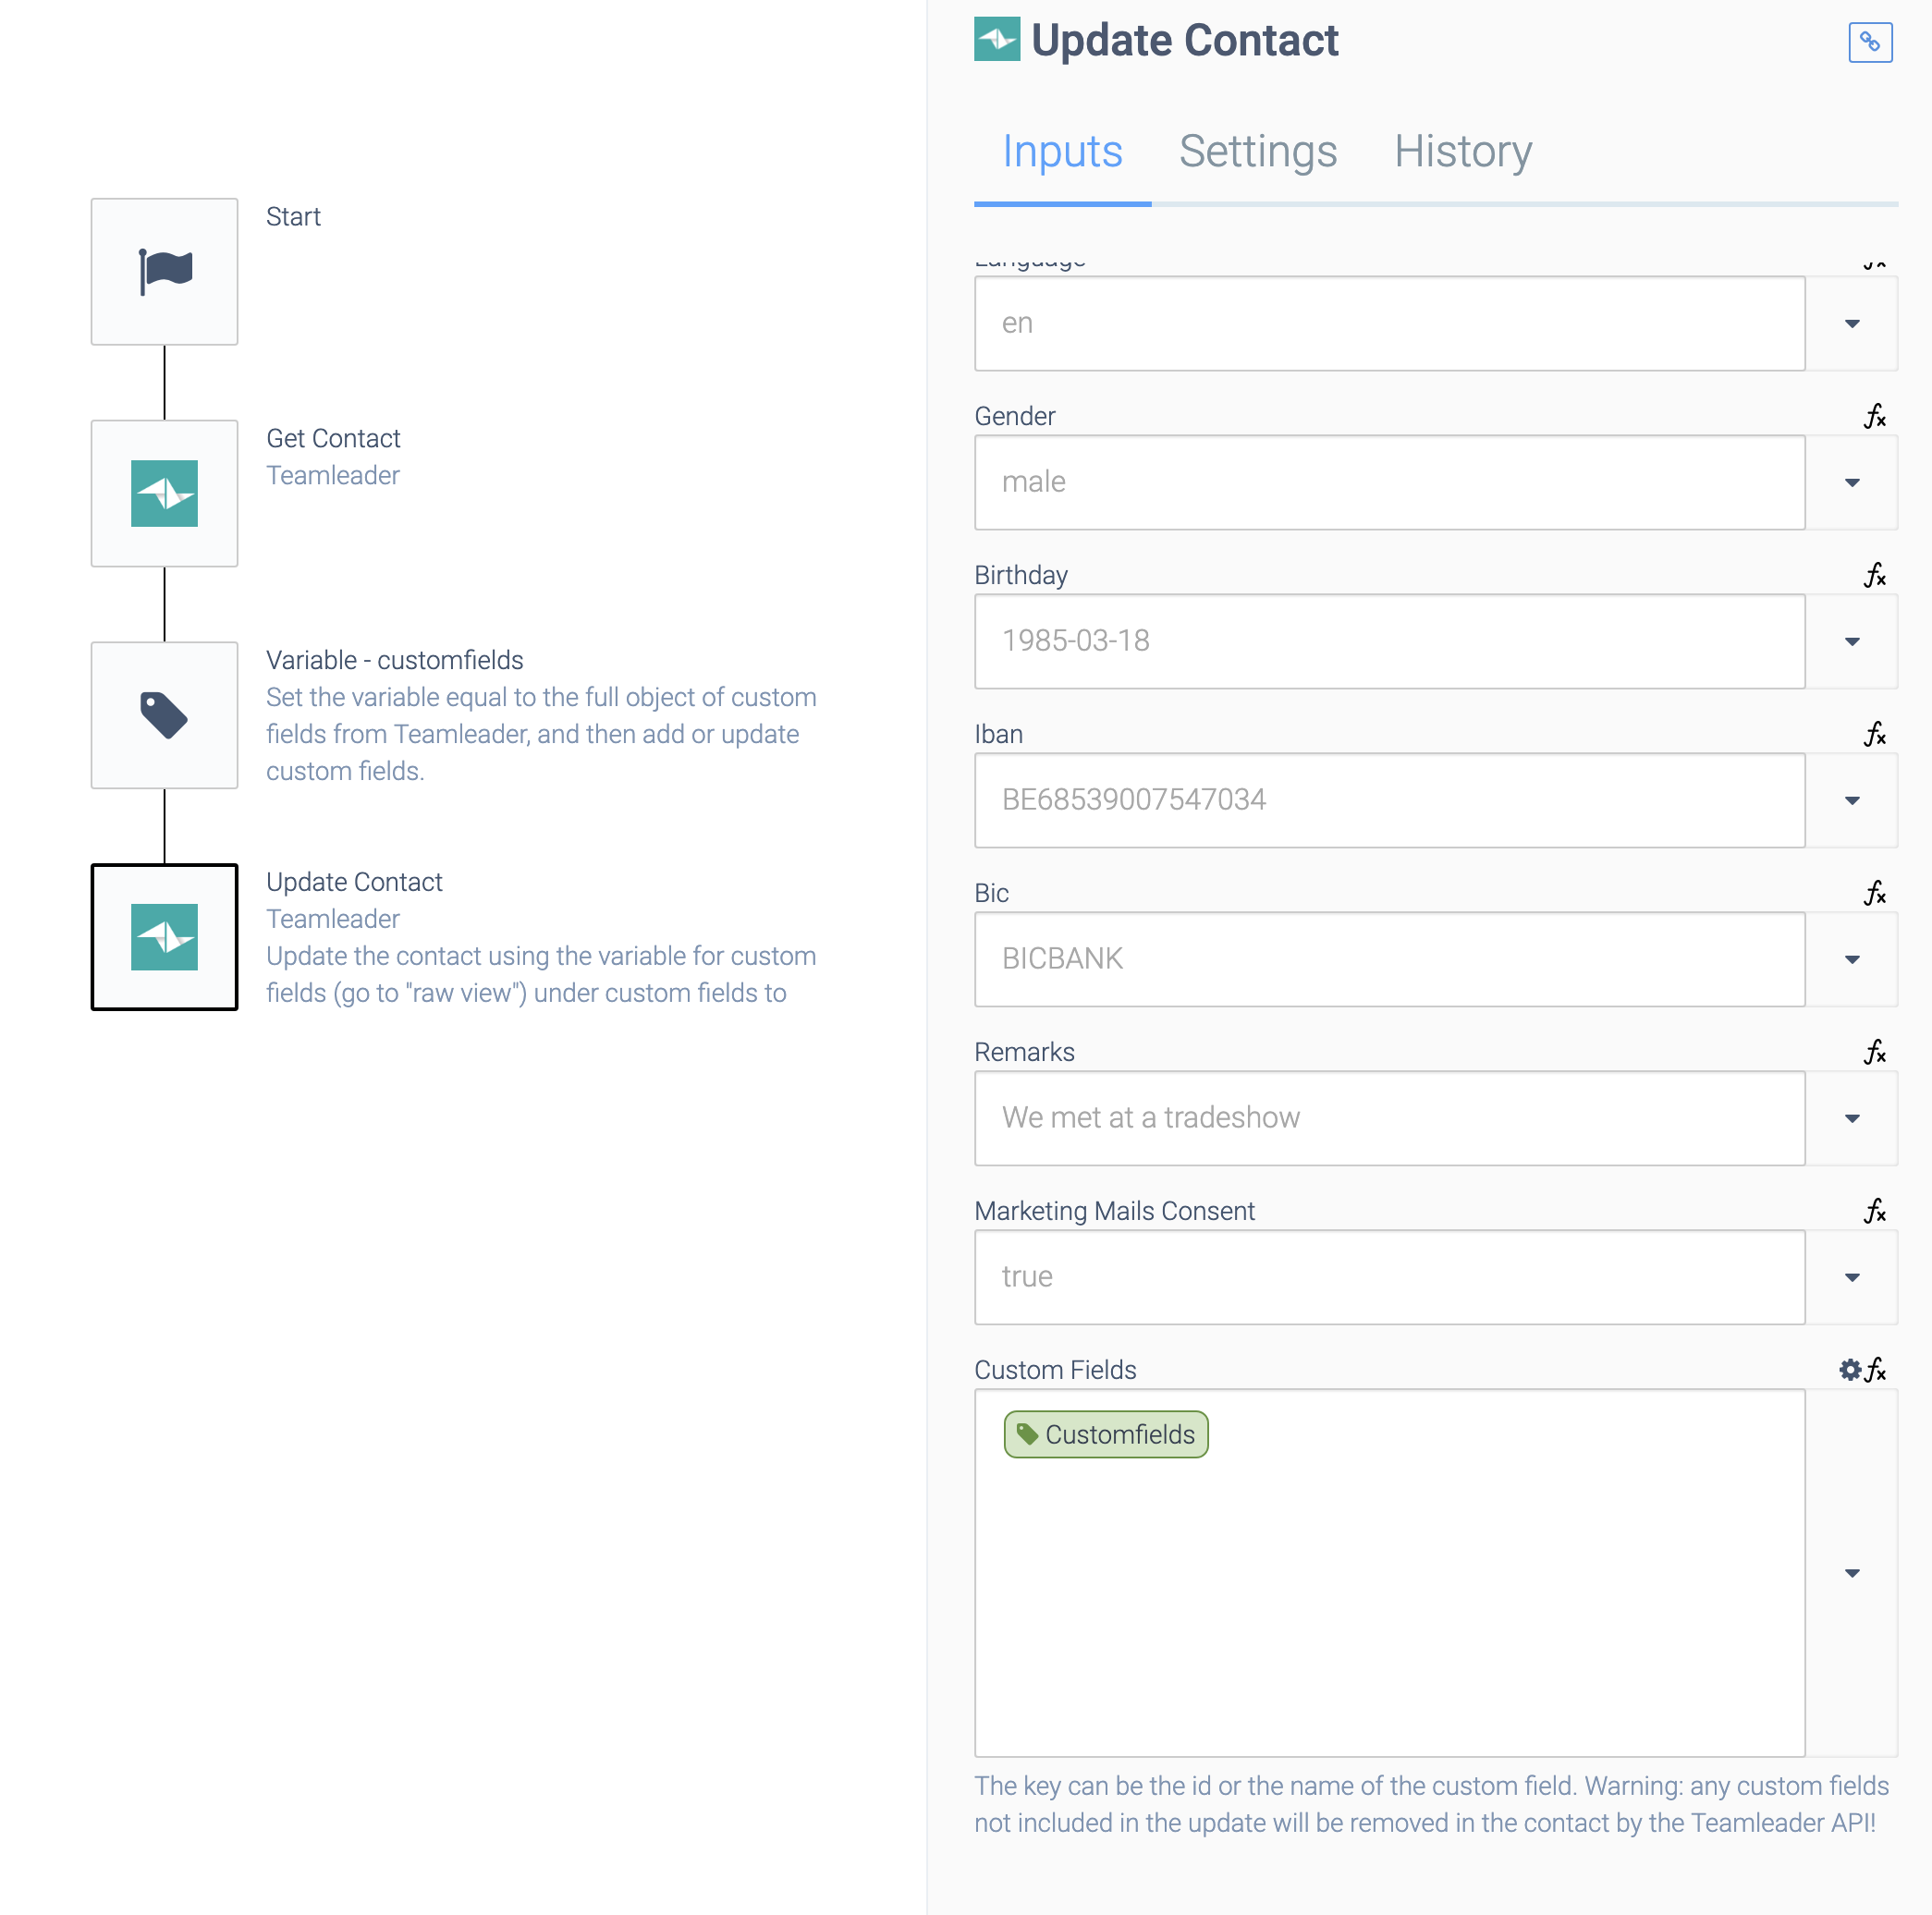 The Update Contact block is selected. The Customfields data is entered under Custom Fields.